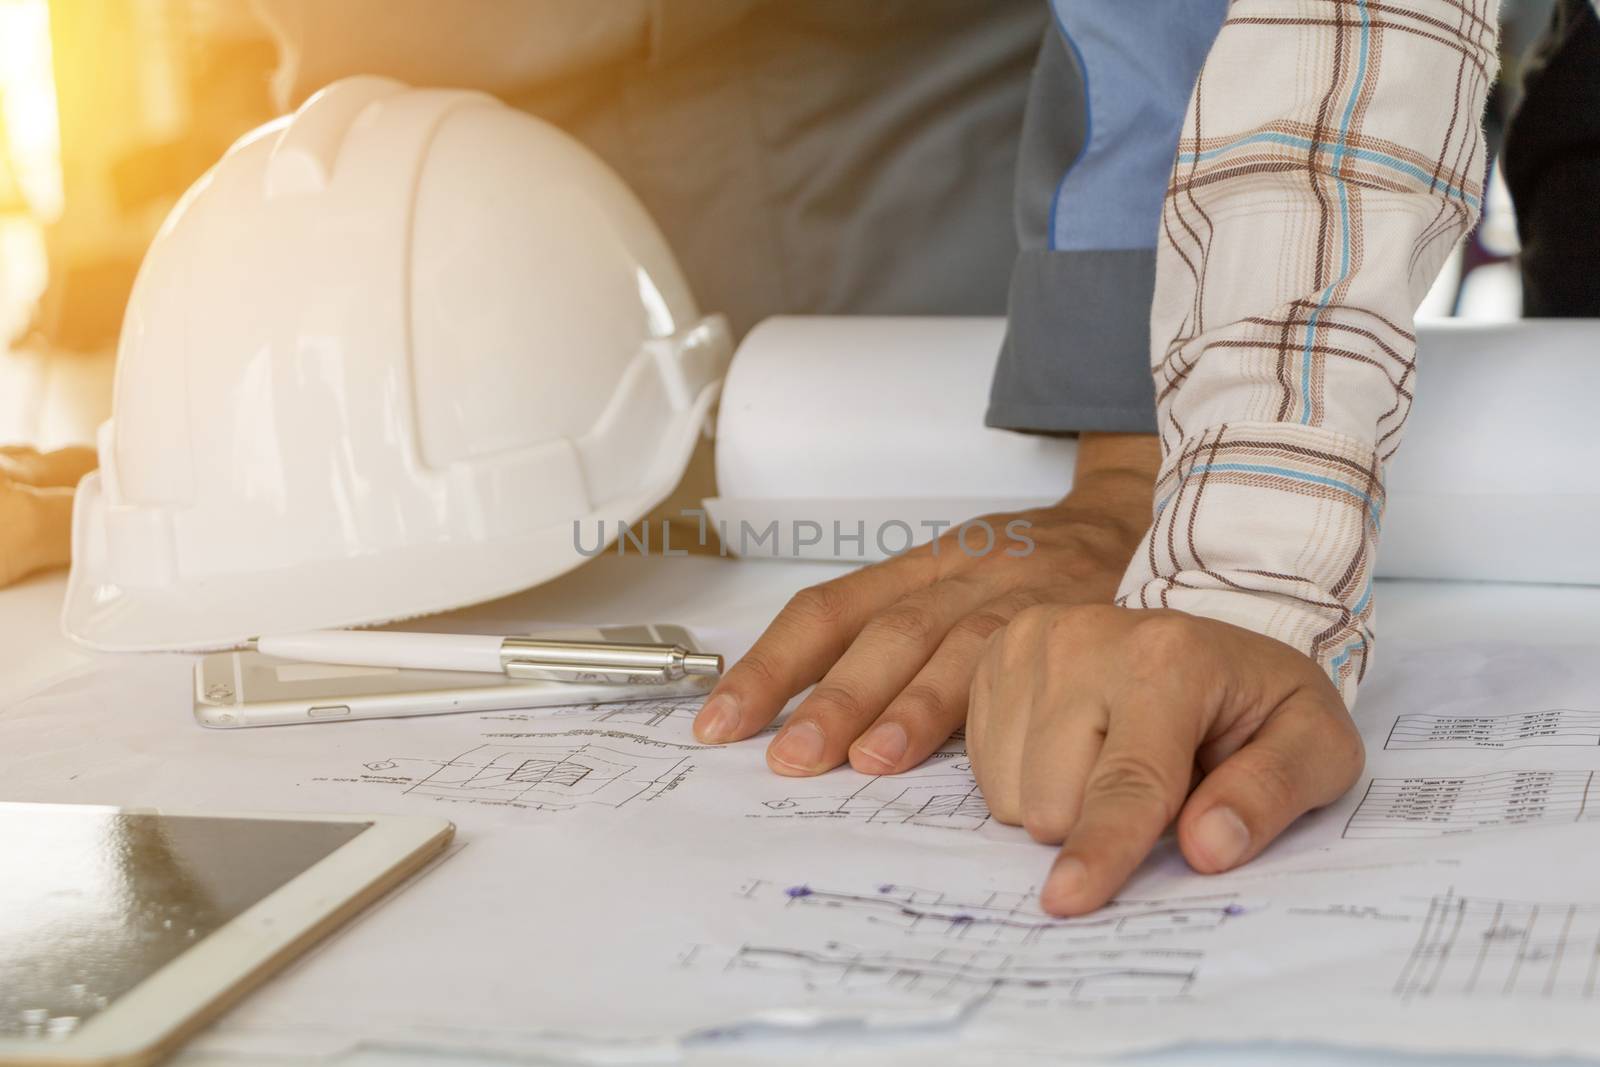 A group of engineers are looking at a blueprint for construction by minamija